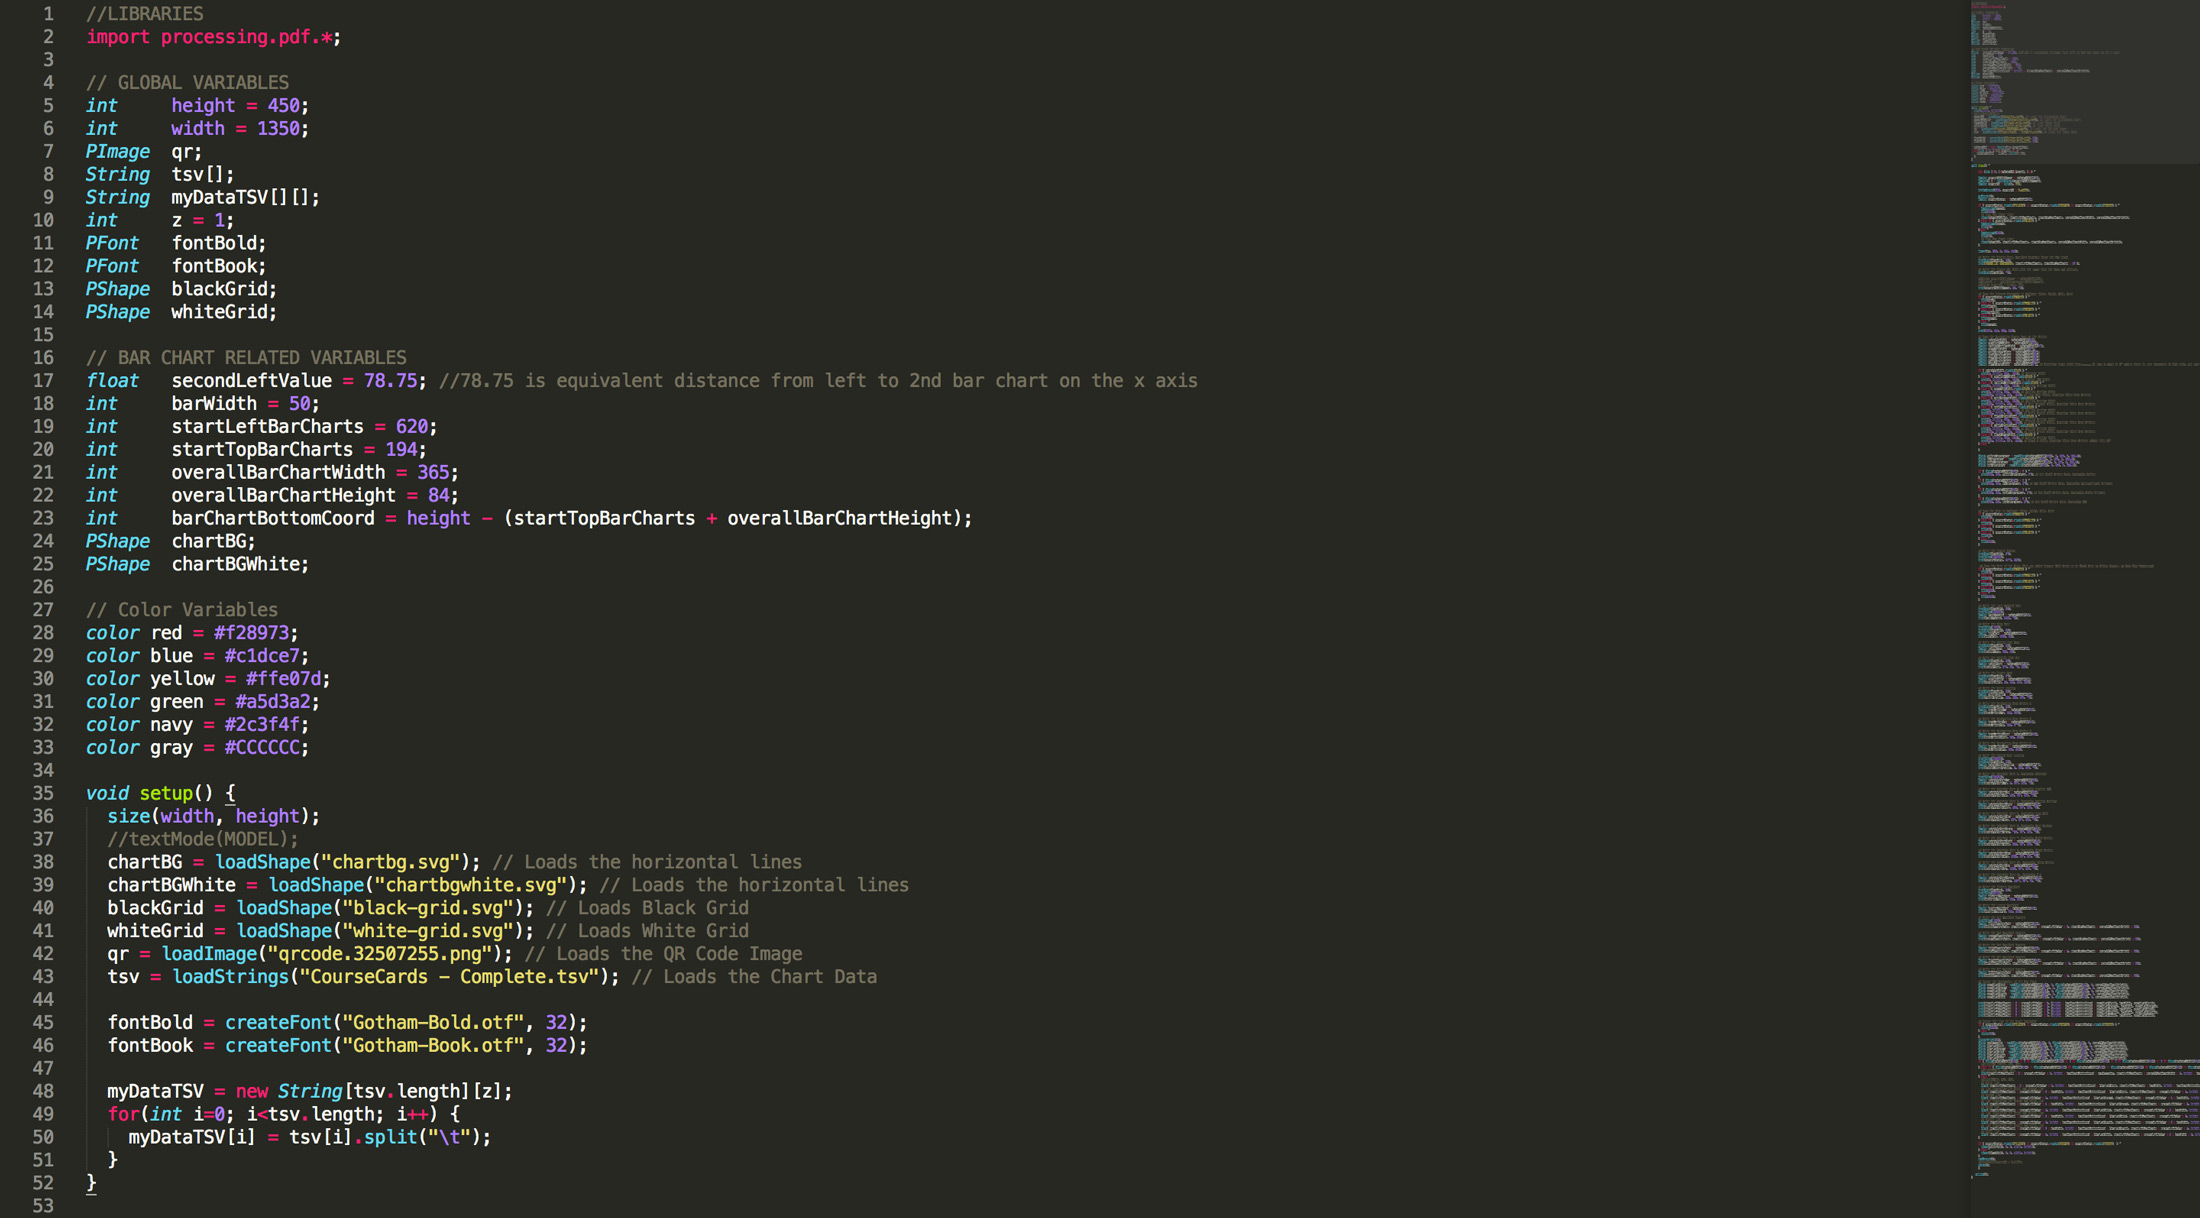 An images showing a portion of the processing code in Sublime Text.